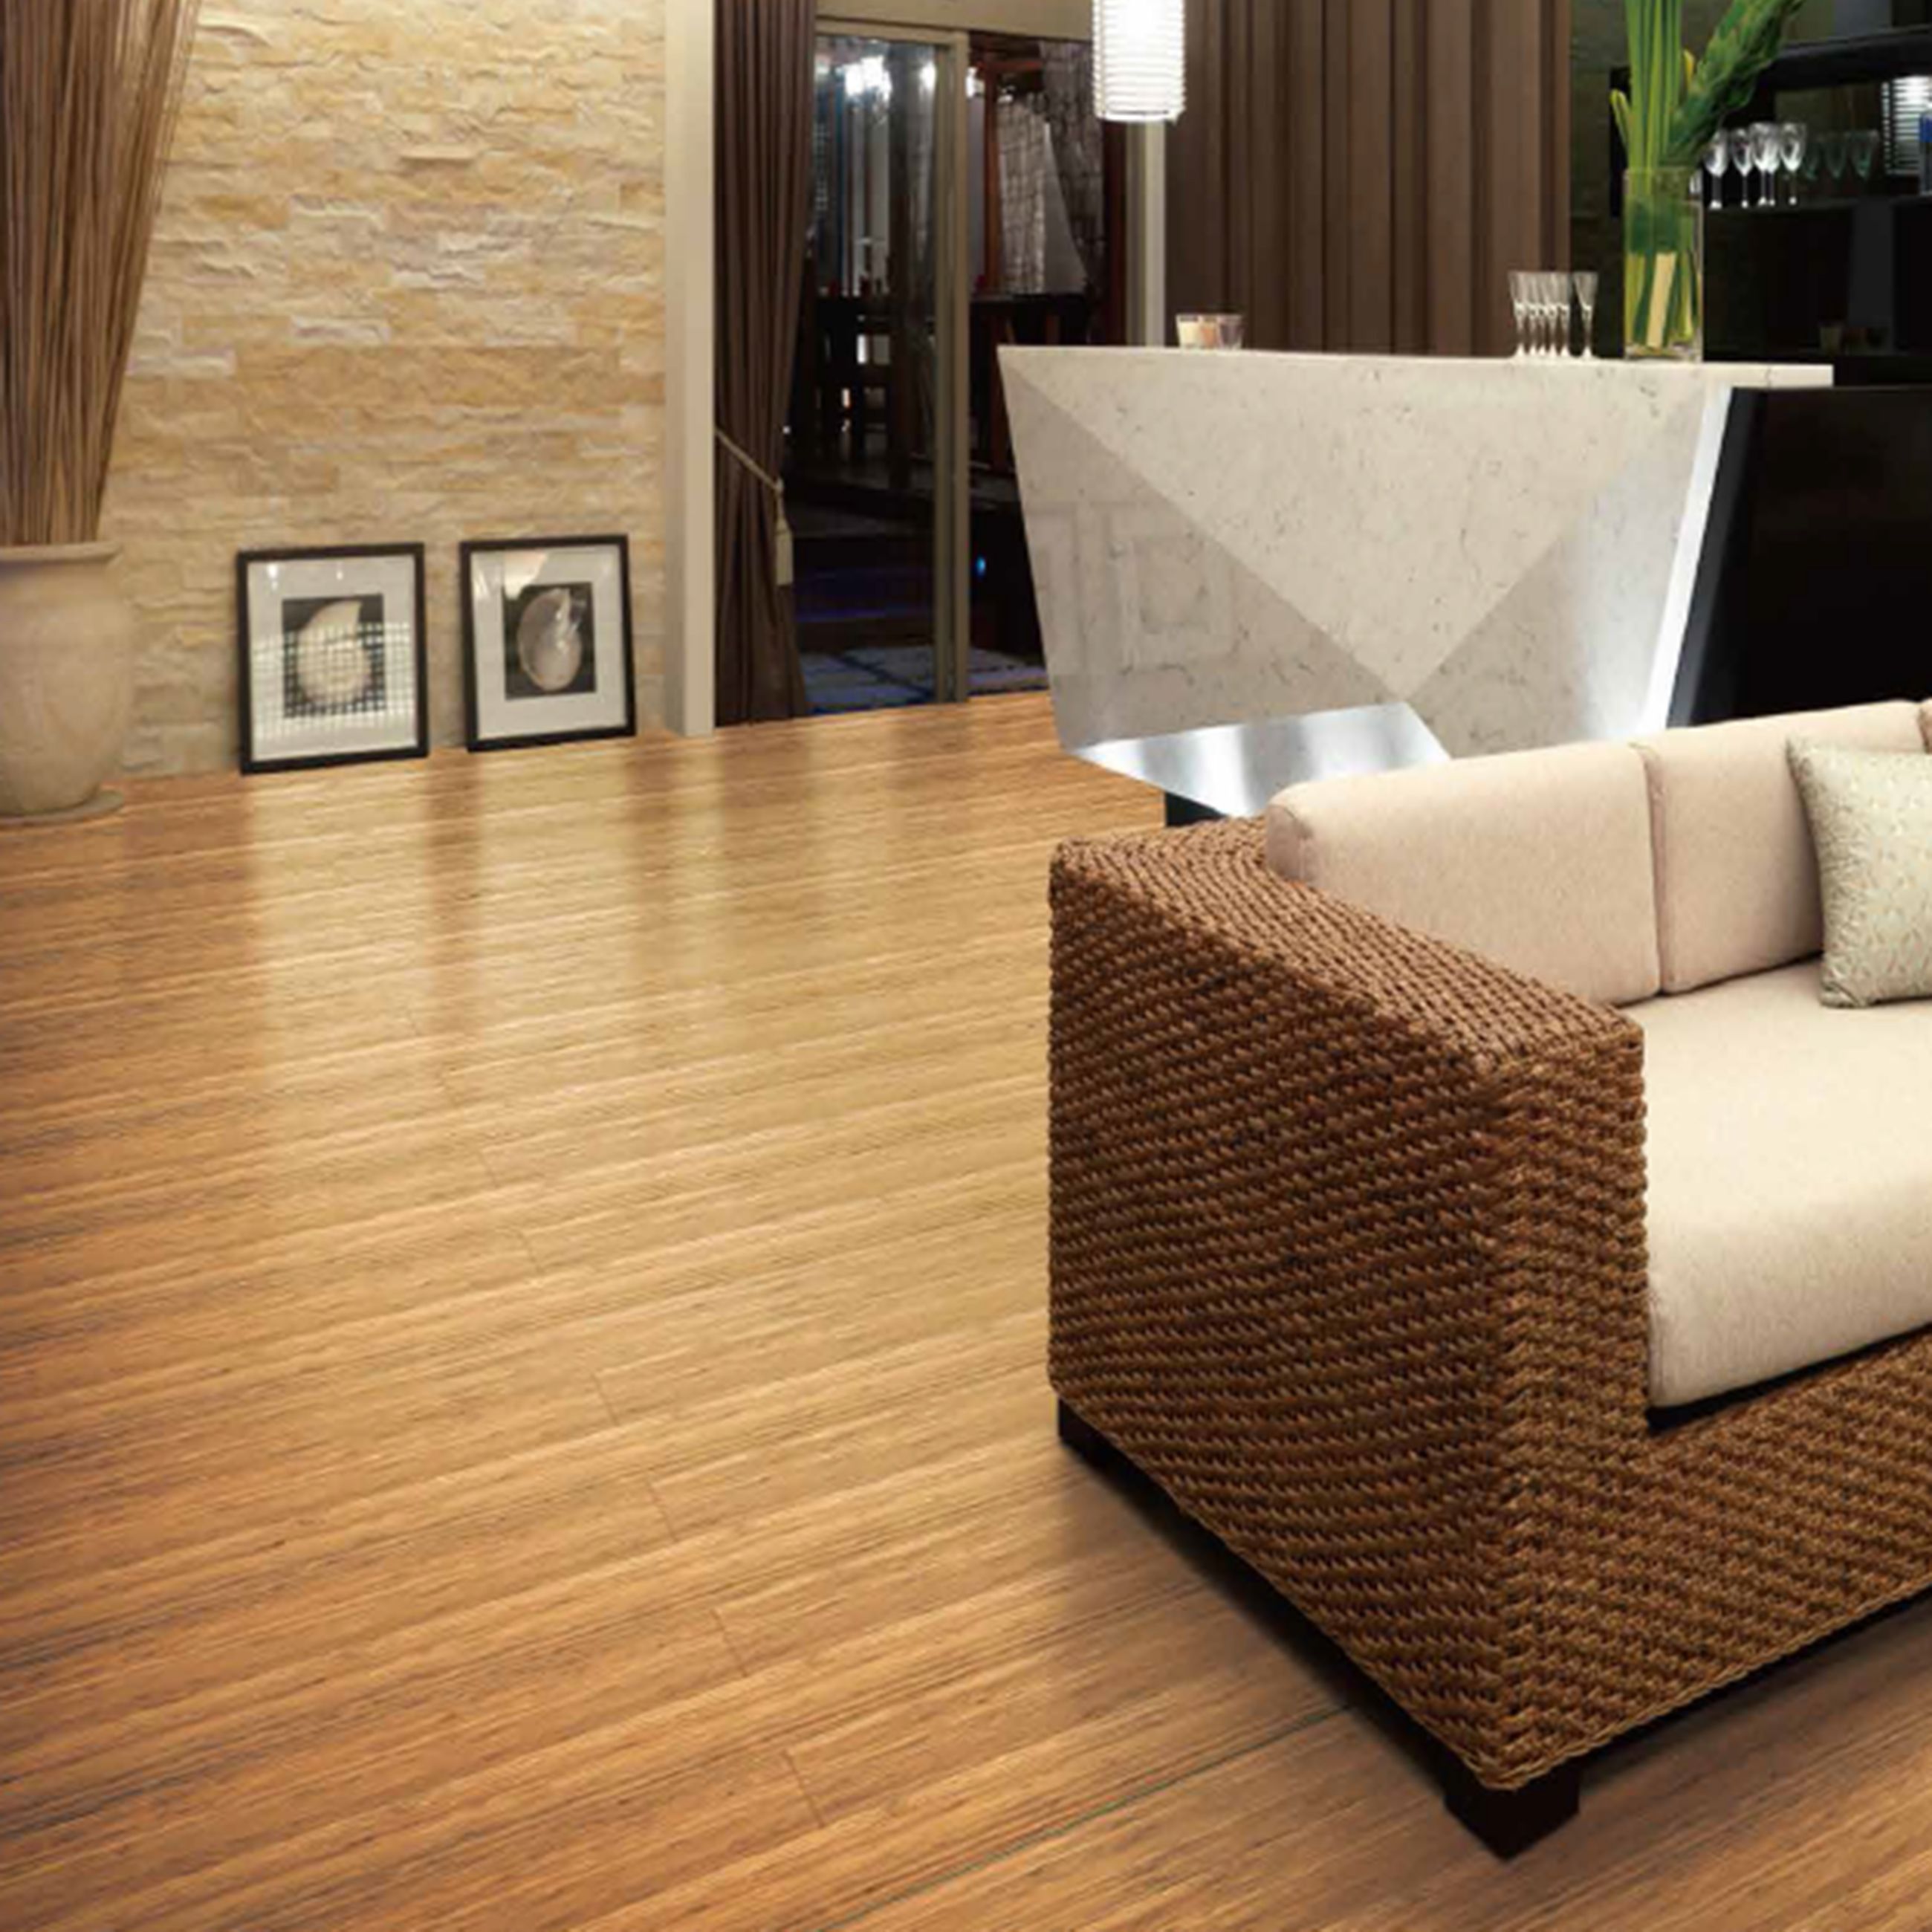 GoodHome Rayong Blonde Wood effect Bamboo Solid wood flooring, 2.21m²